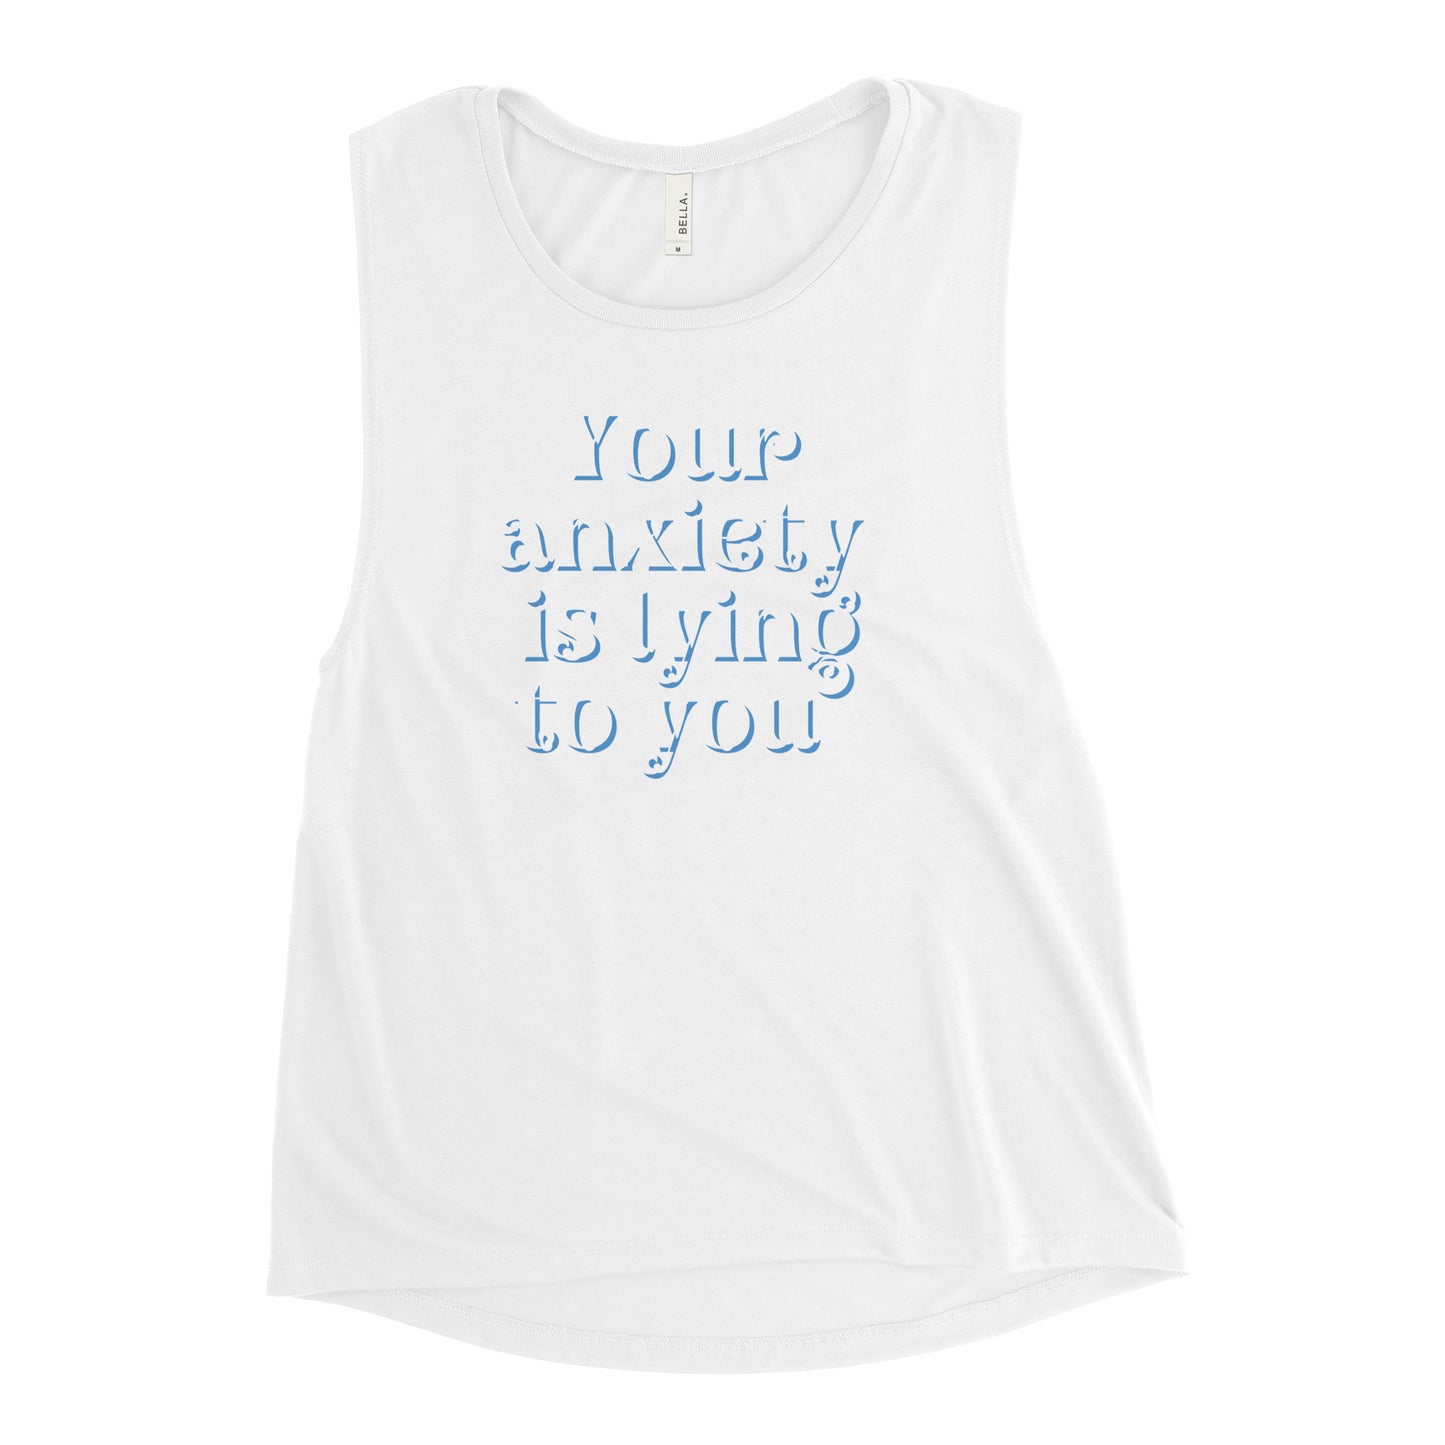 Your anxiety is lying to you® Ladies’ Muscle Tank